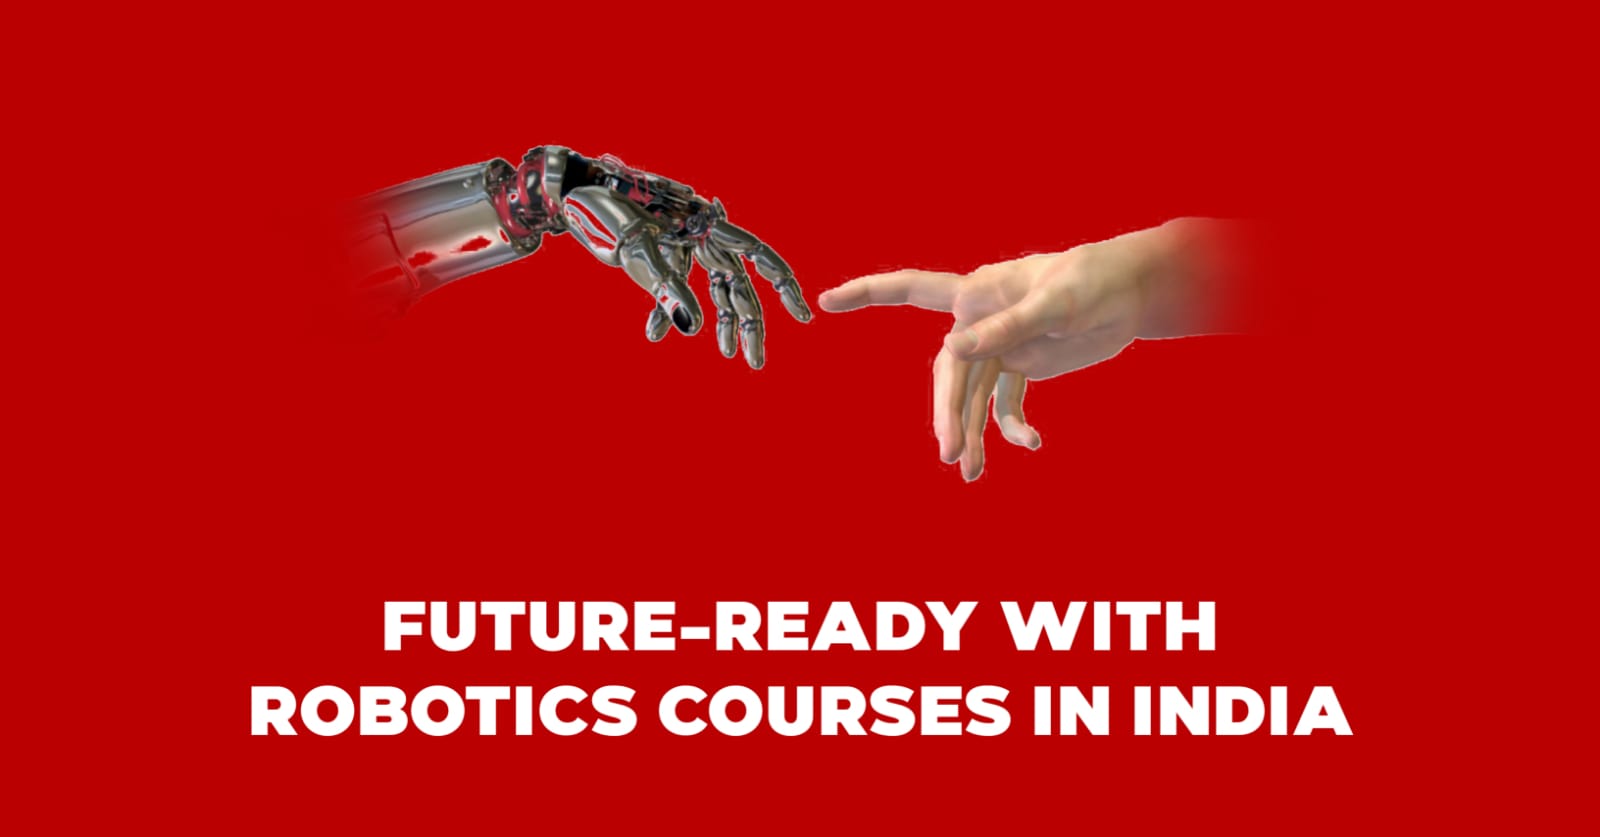 Future-Ready with Robotics Courses in India